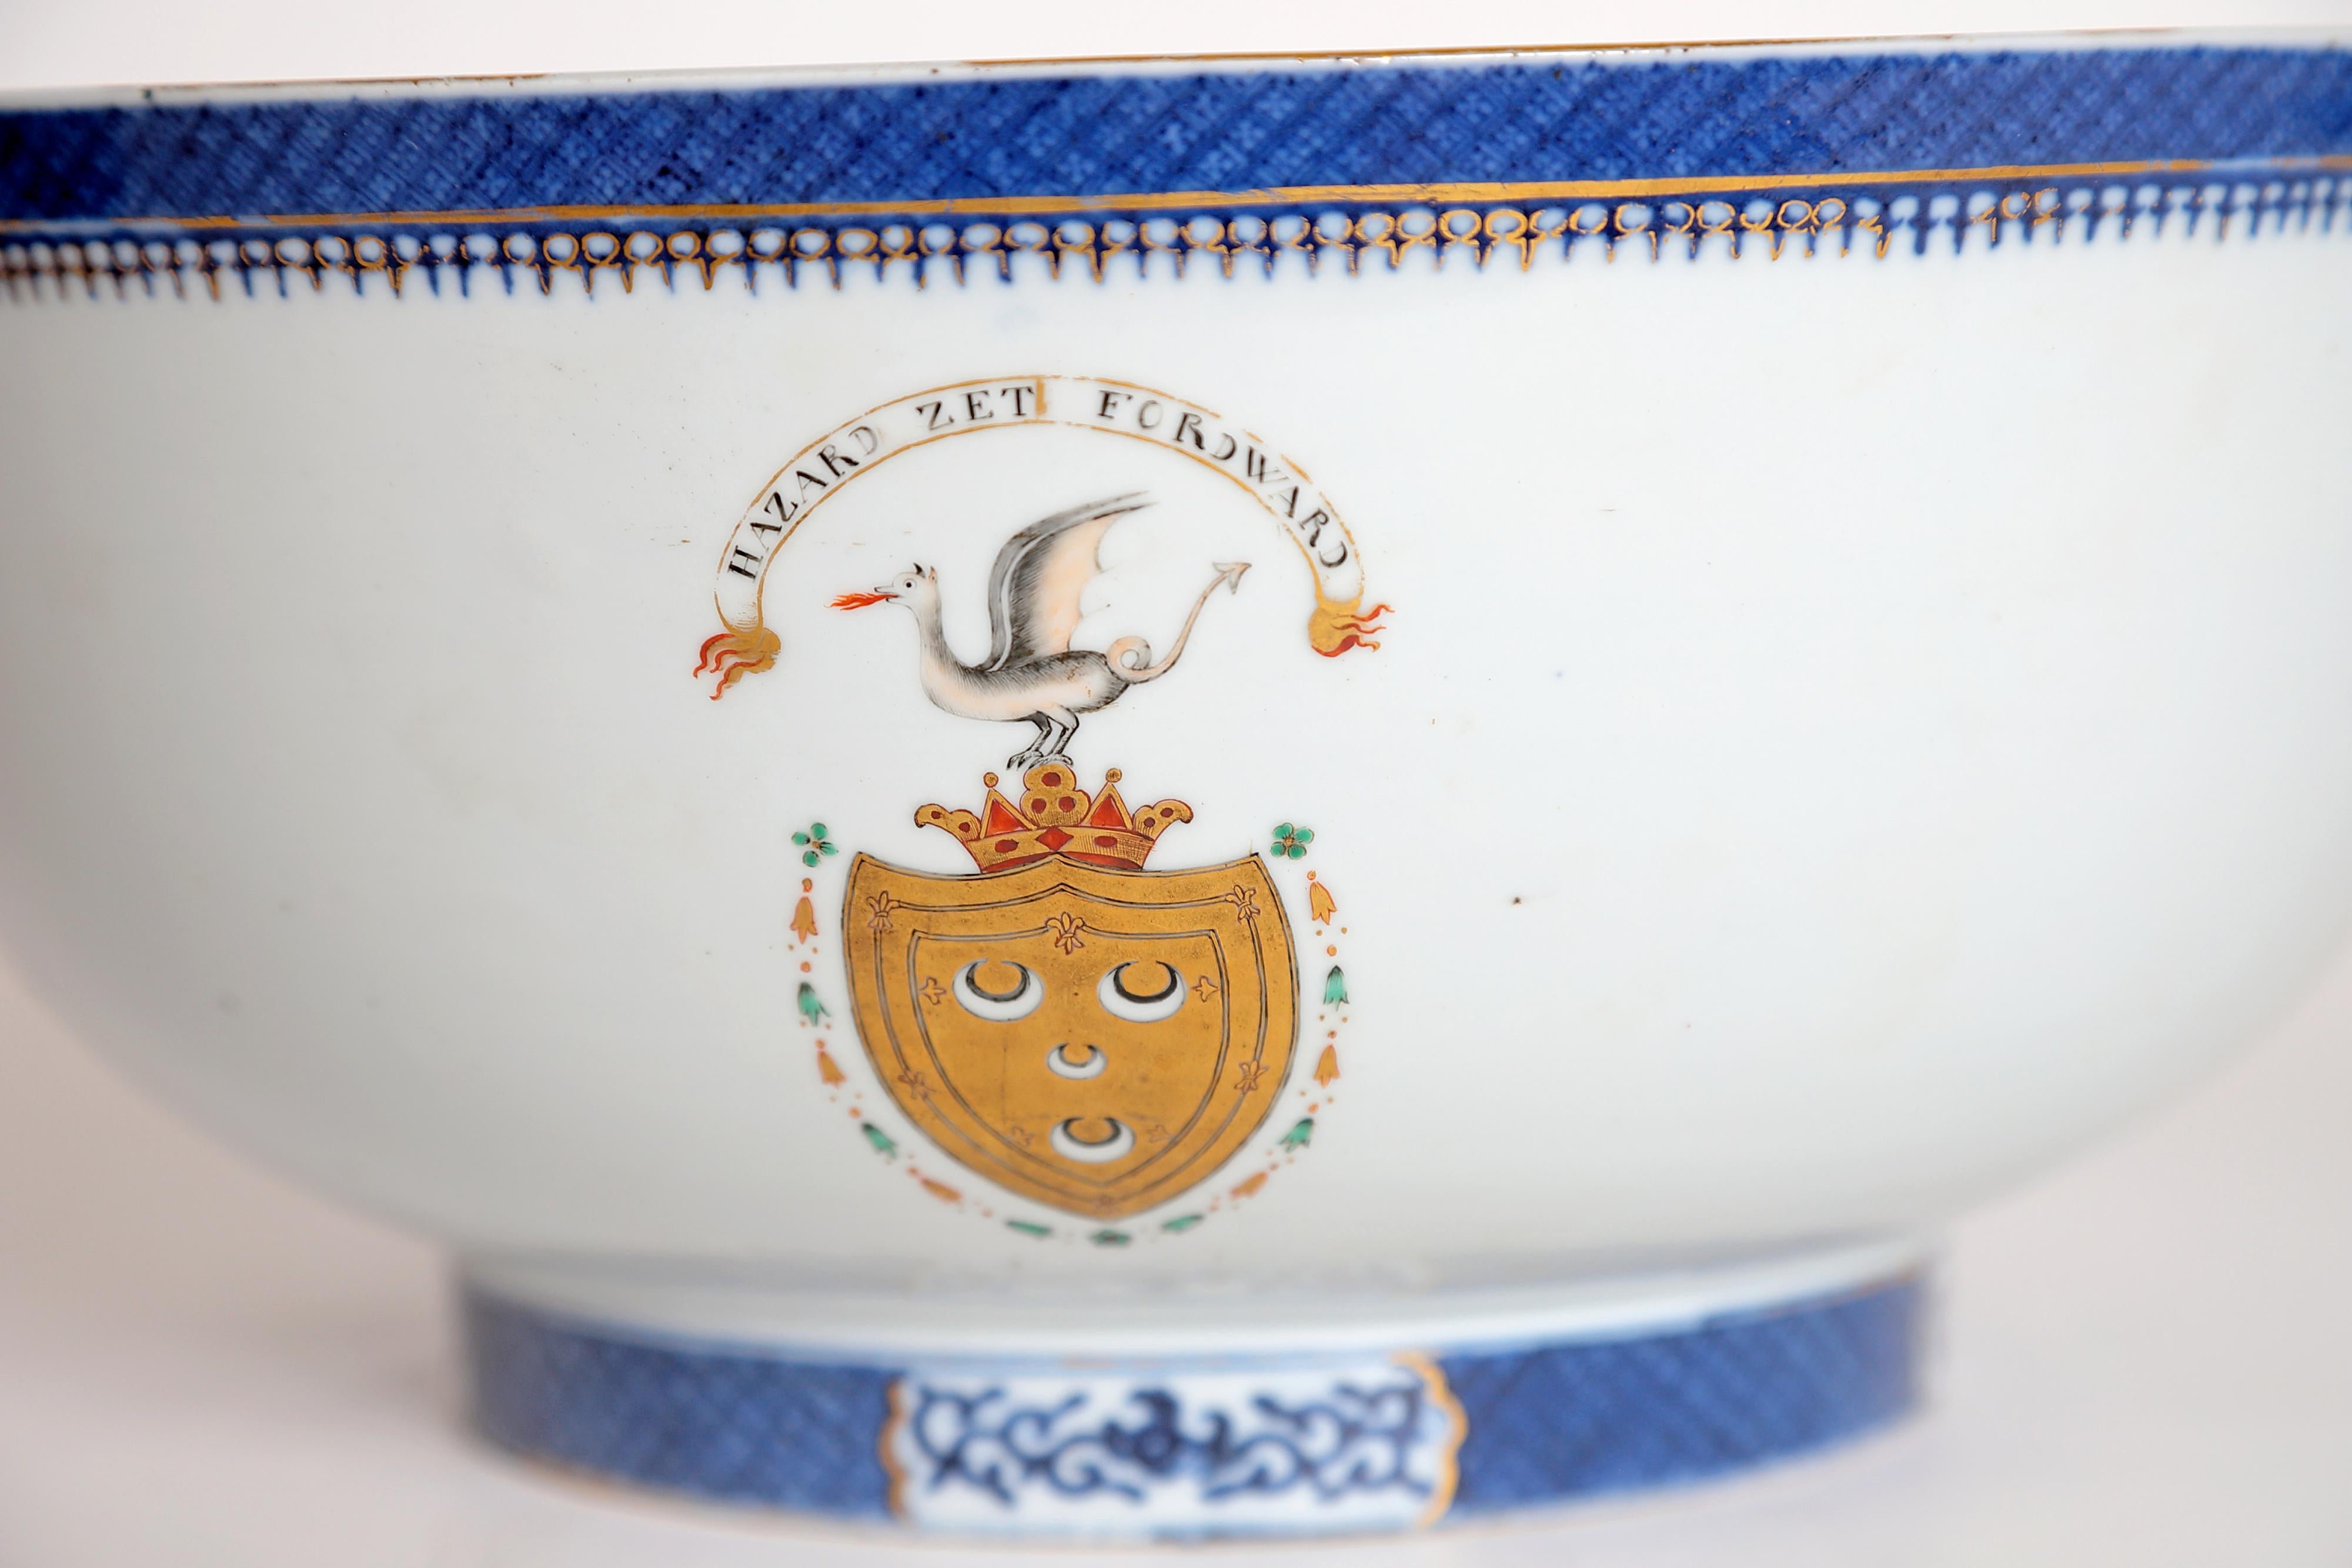 A lovely well-used Chinese Export armorial porcelain punch bowl with coat of arms / crest of Clan Seton, motto 'HAZARD ZET FORWARD